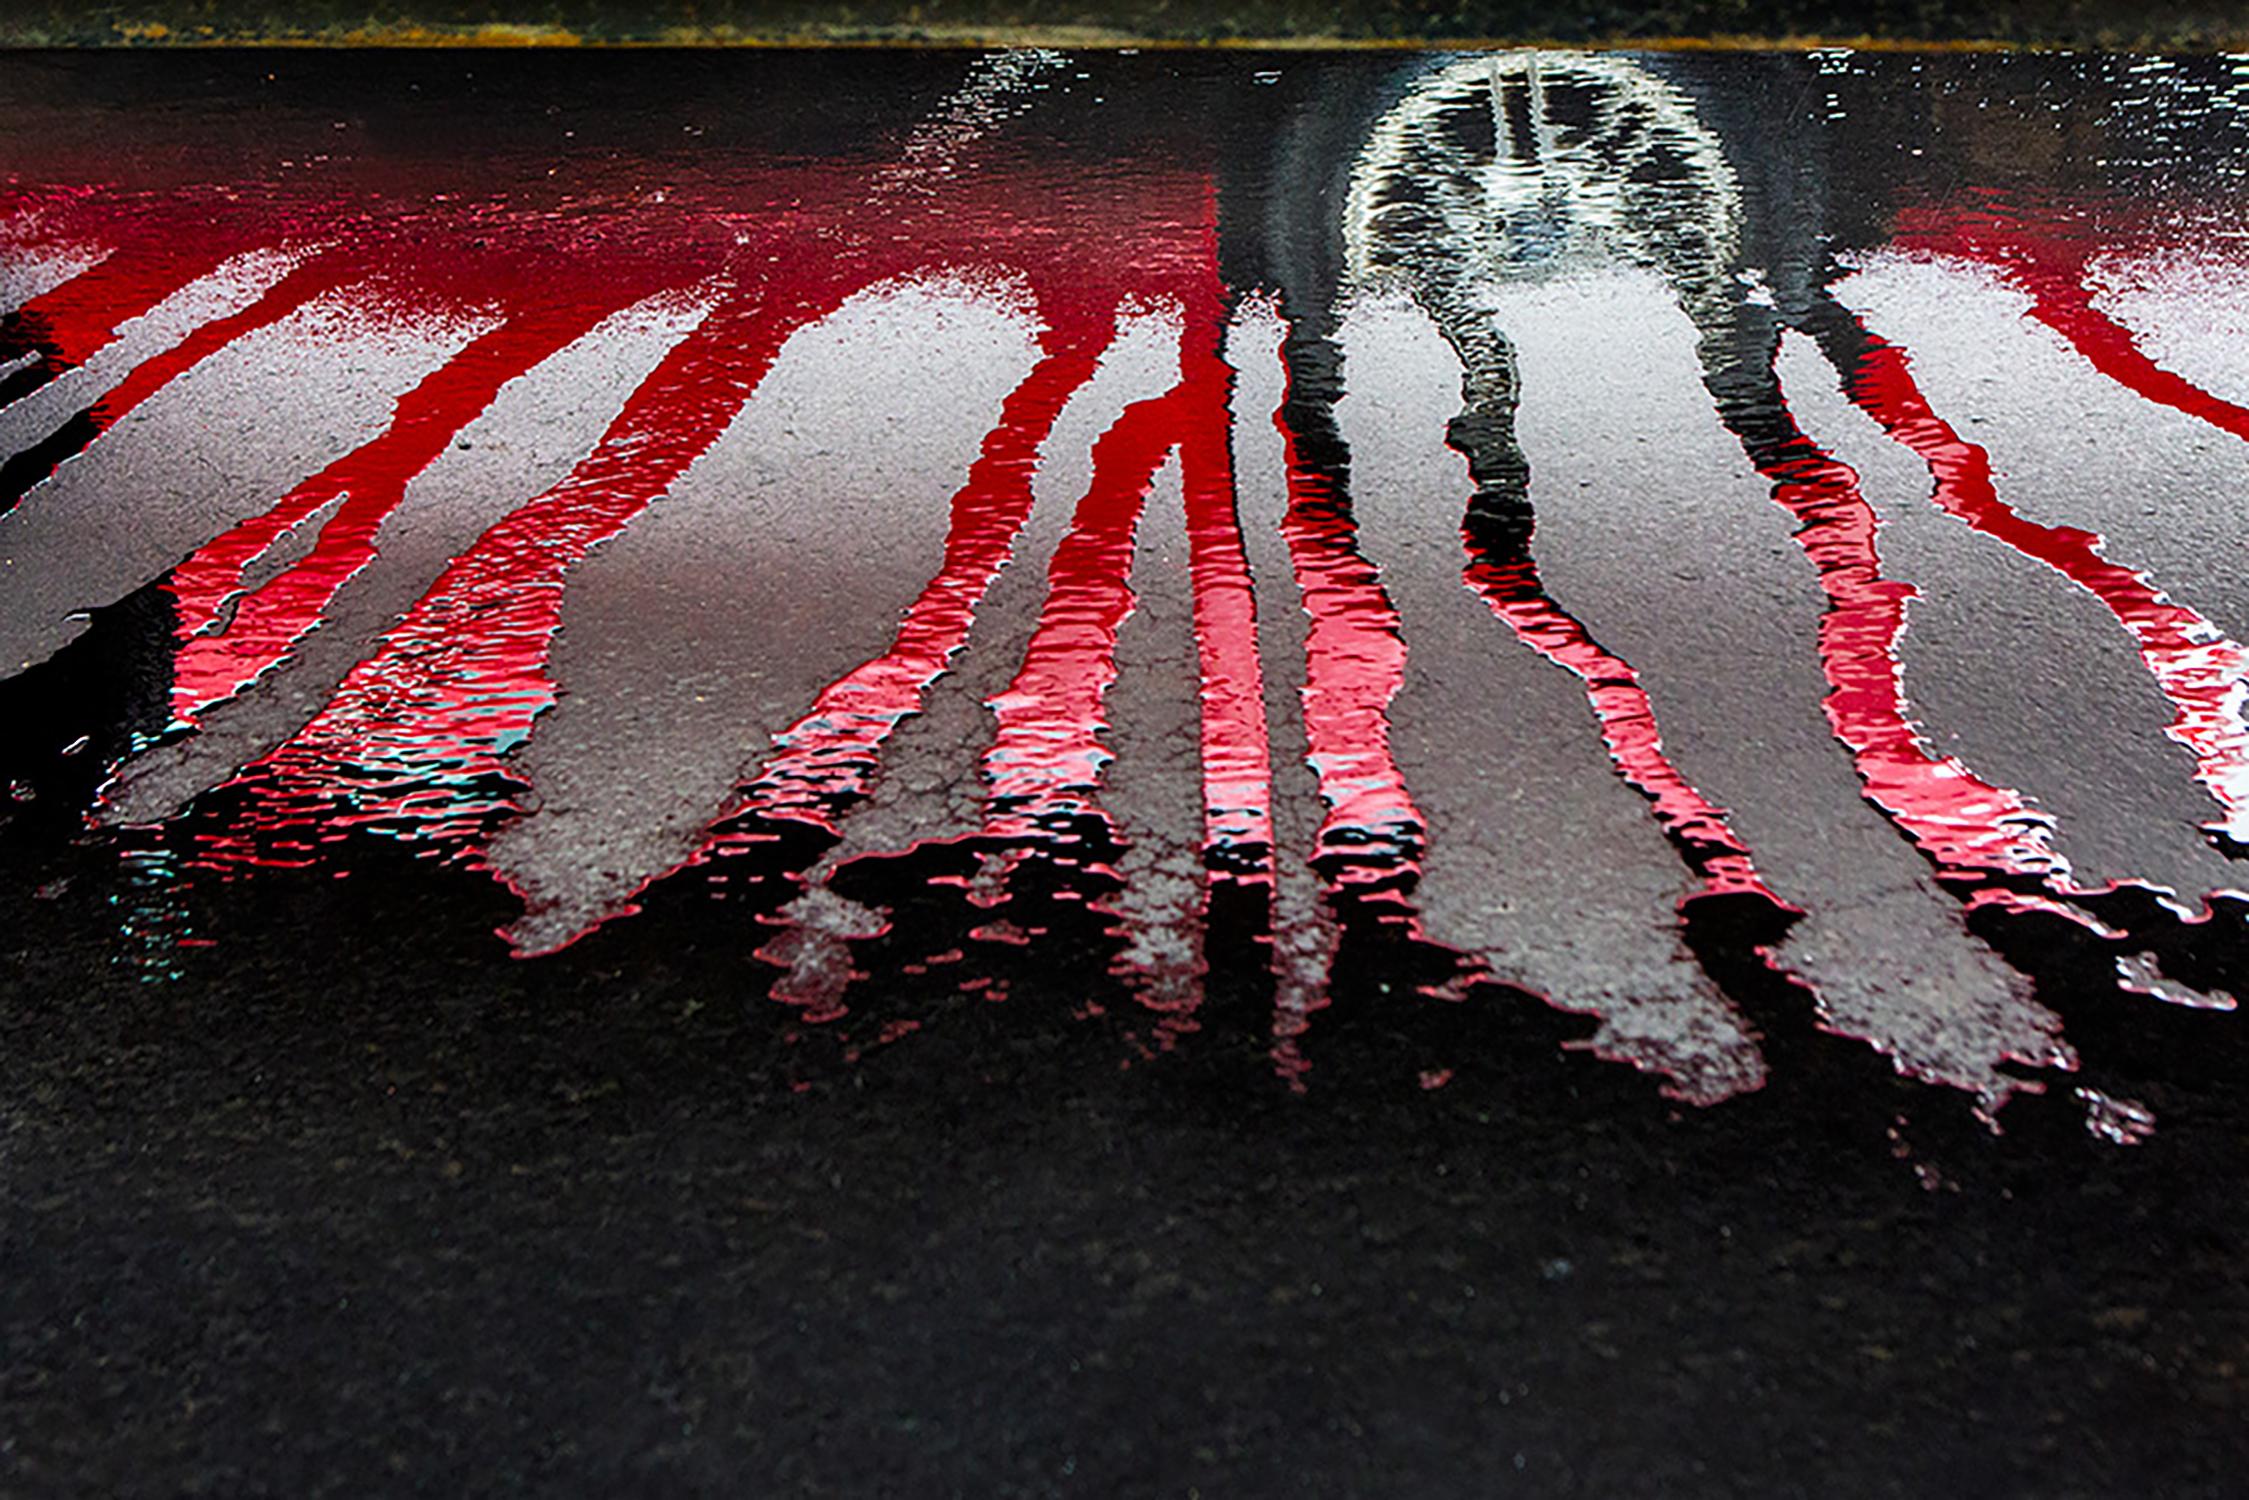 "Navigate" - Southern, car, staged photography, abstract, red